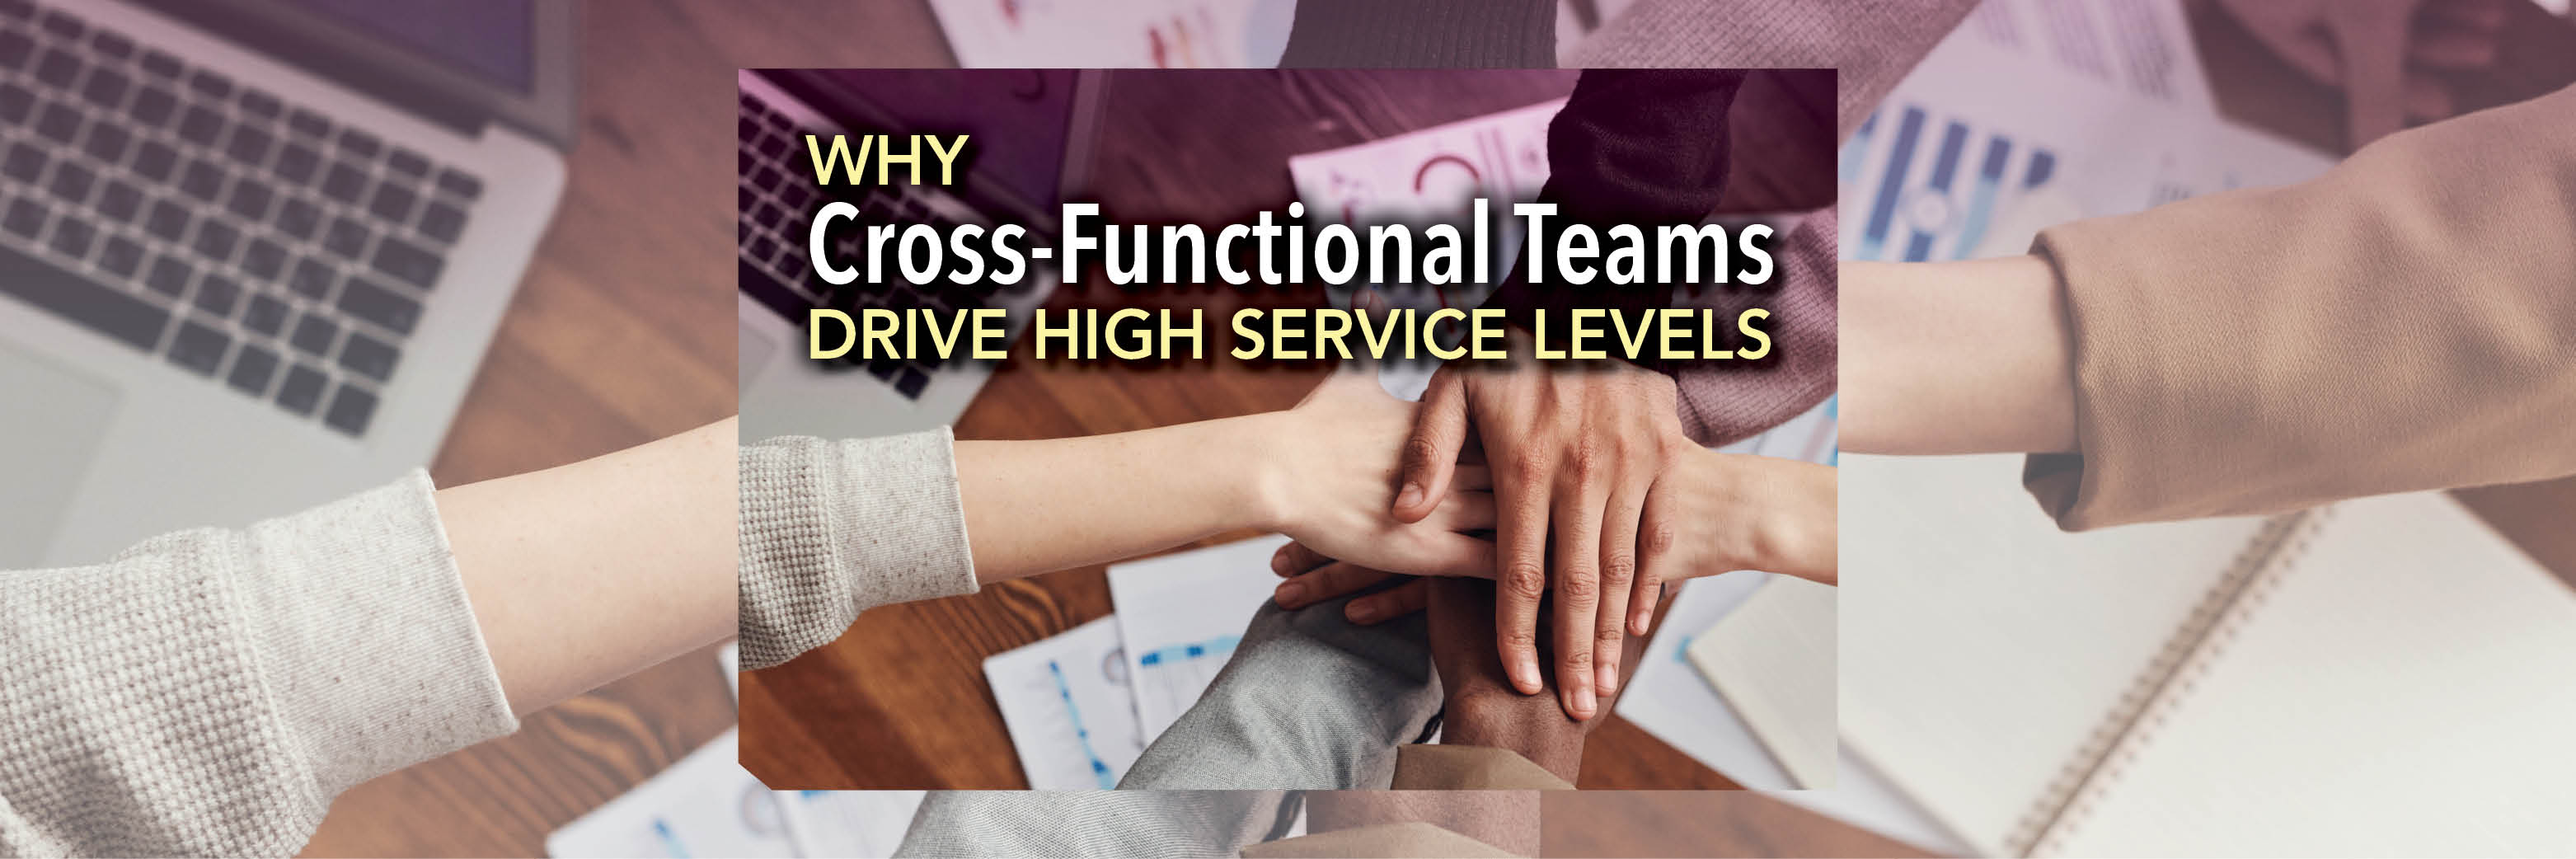 Why Cross-Functional Teams Drive High Service Levels